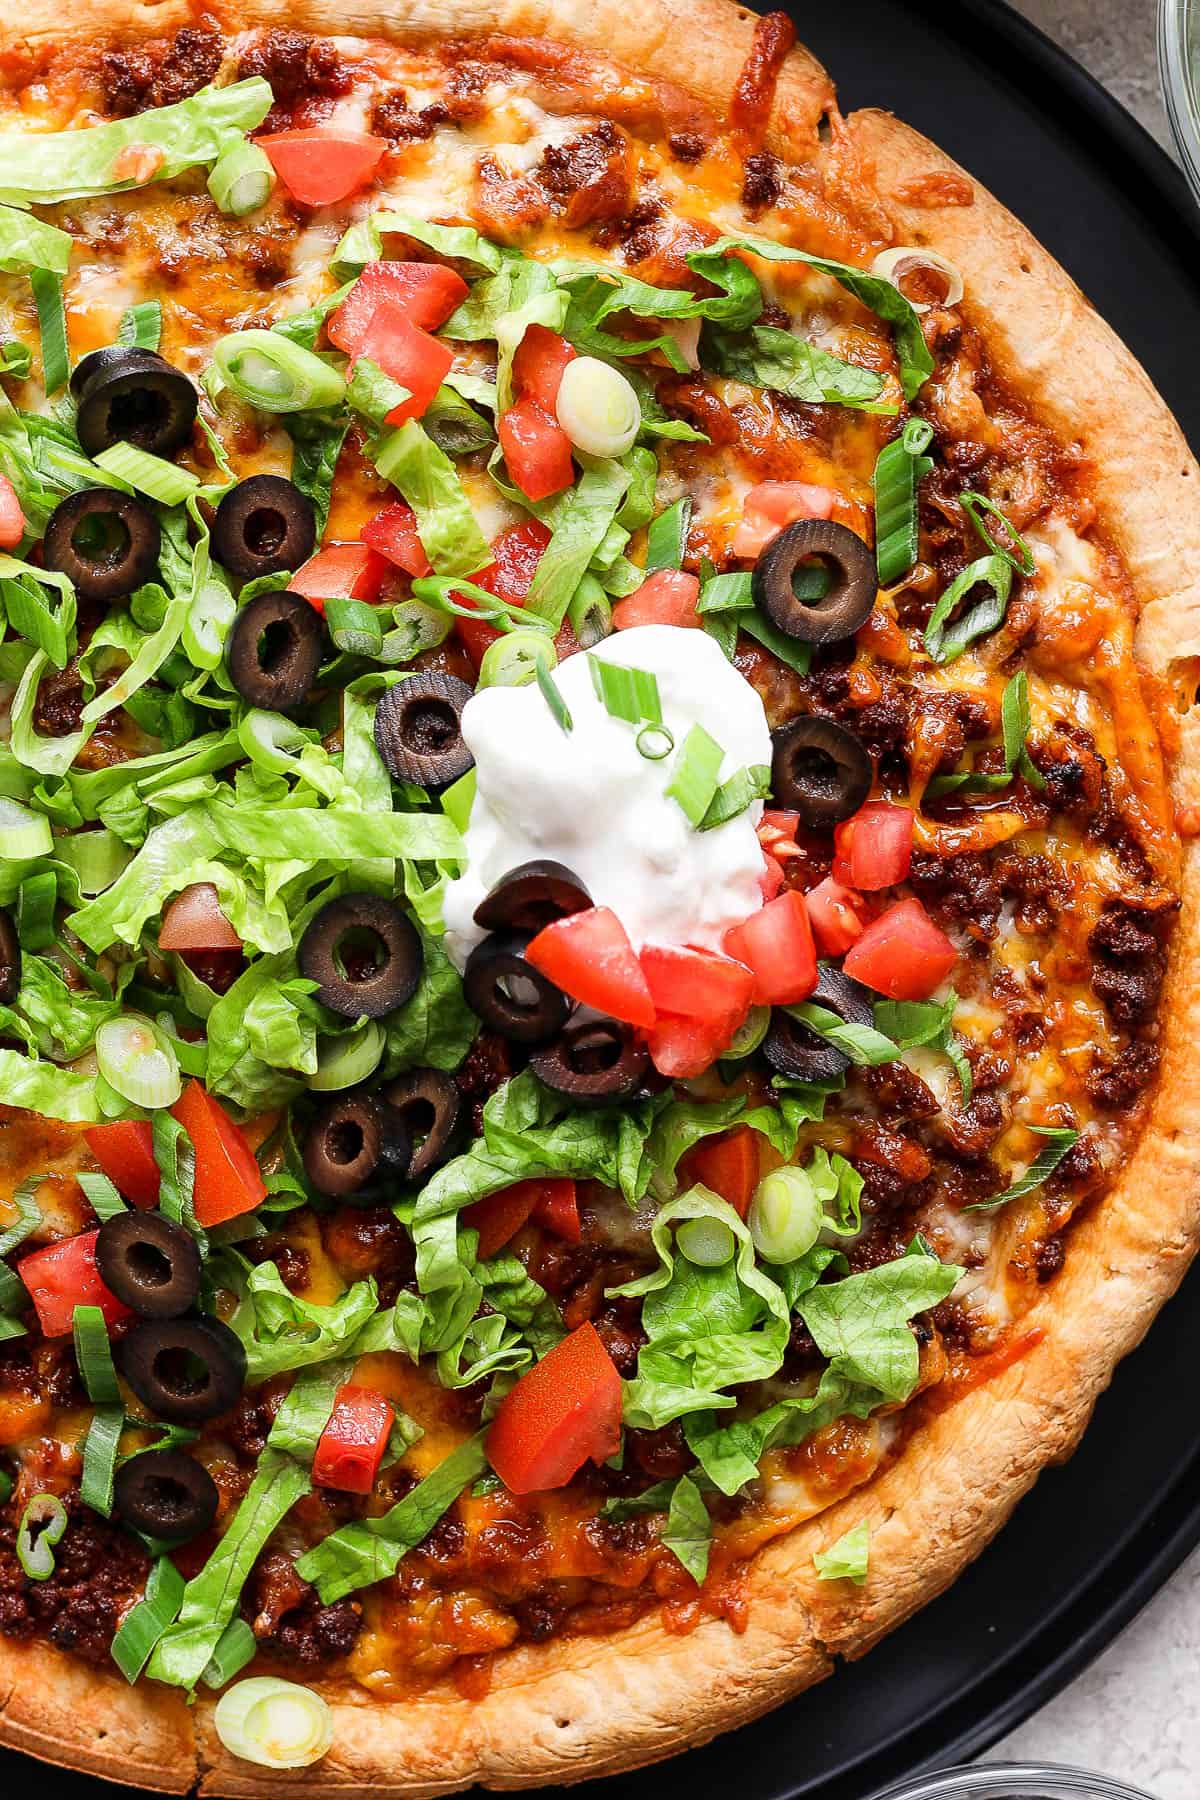 Easy taco pizza topped with sour cream, shredded lettuce, diced tomatoes, and other taco toppings.